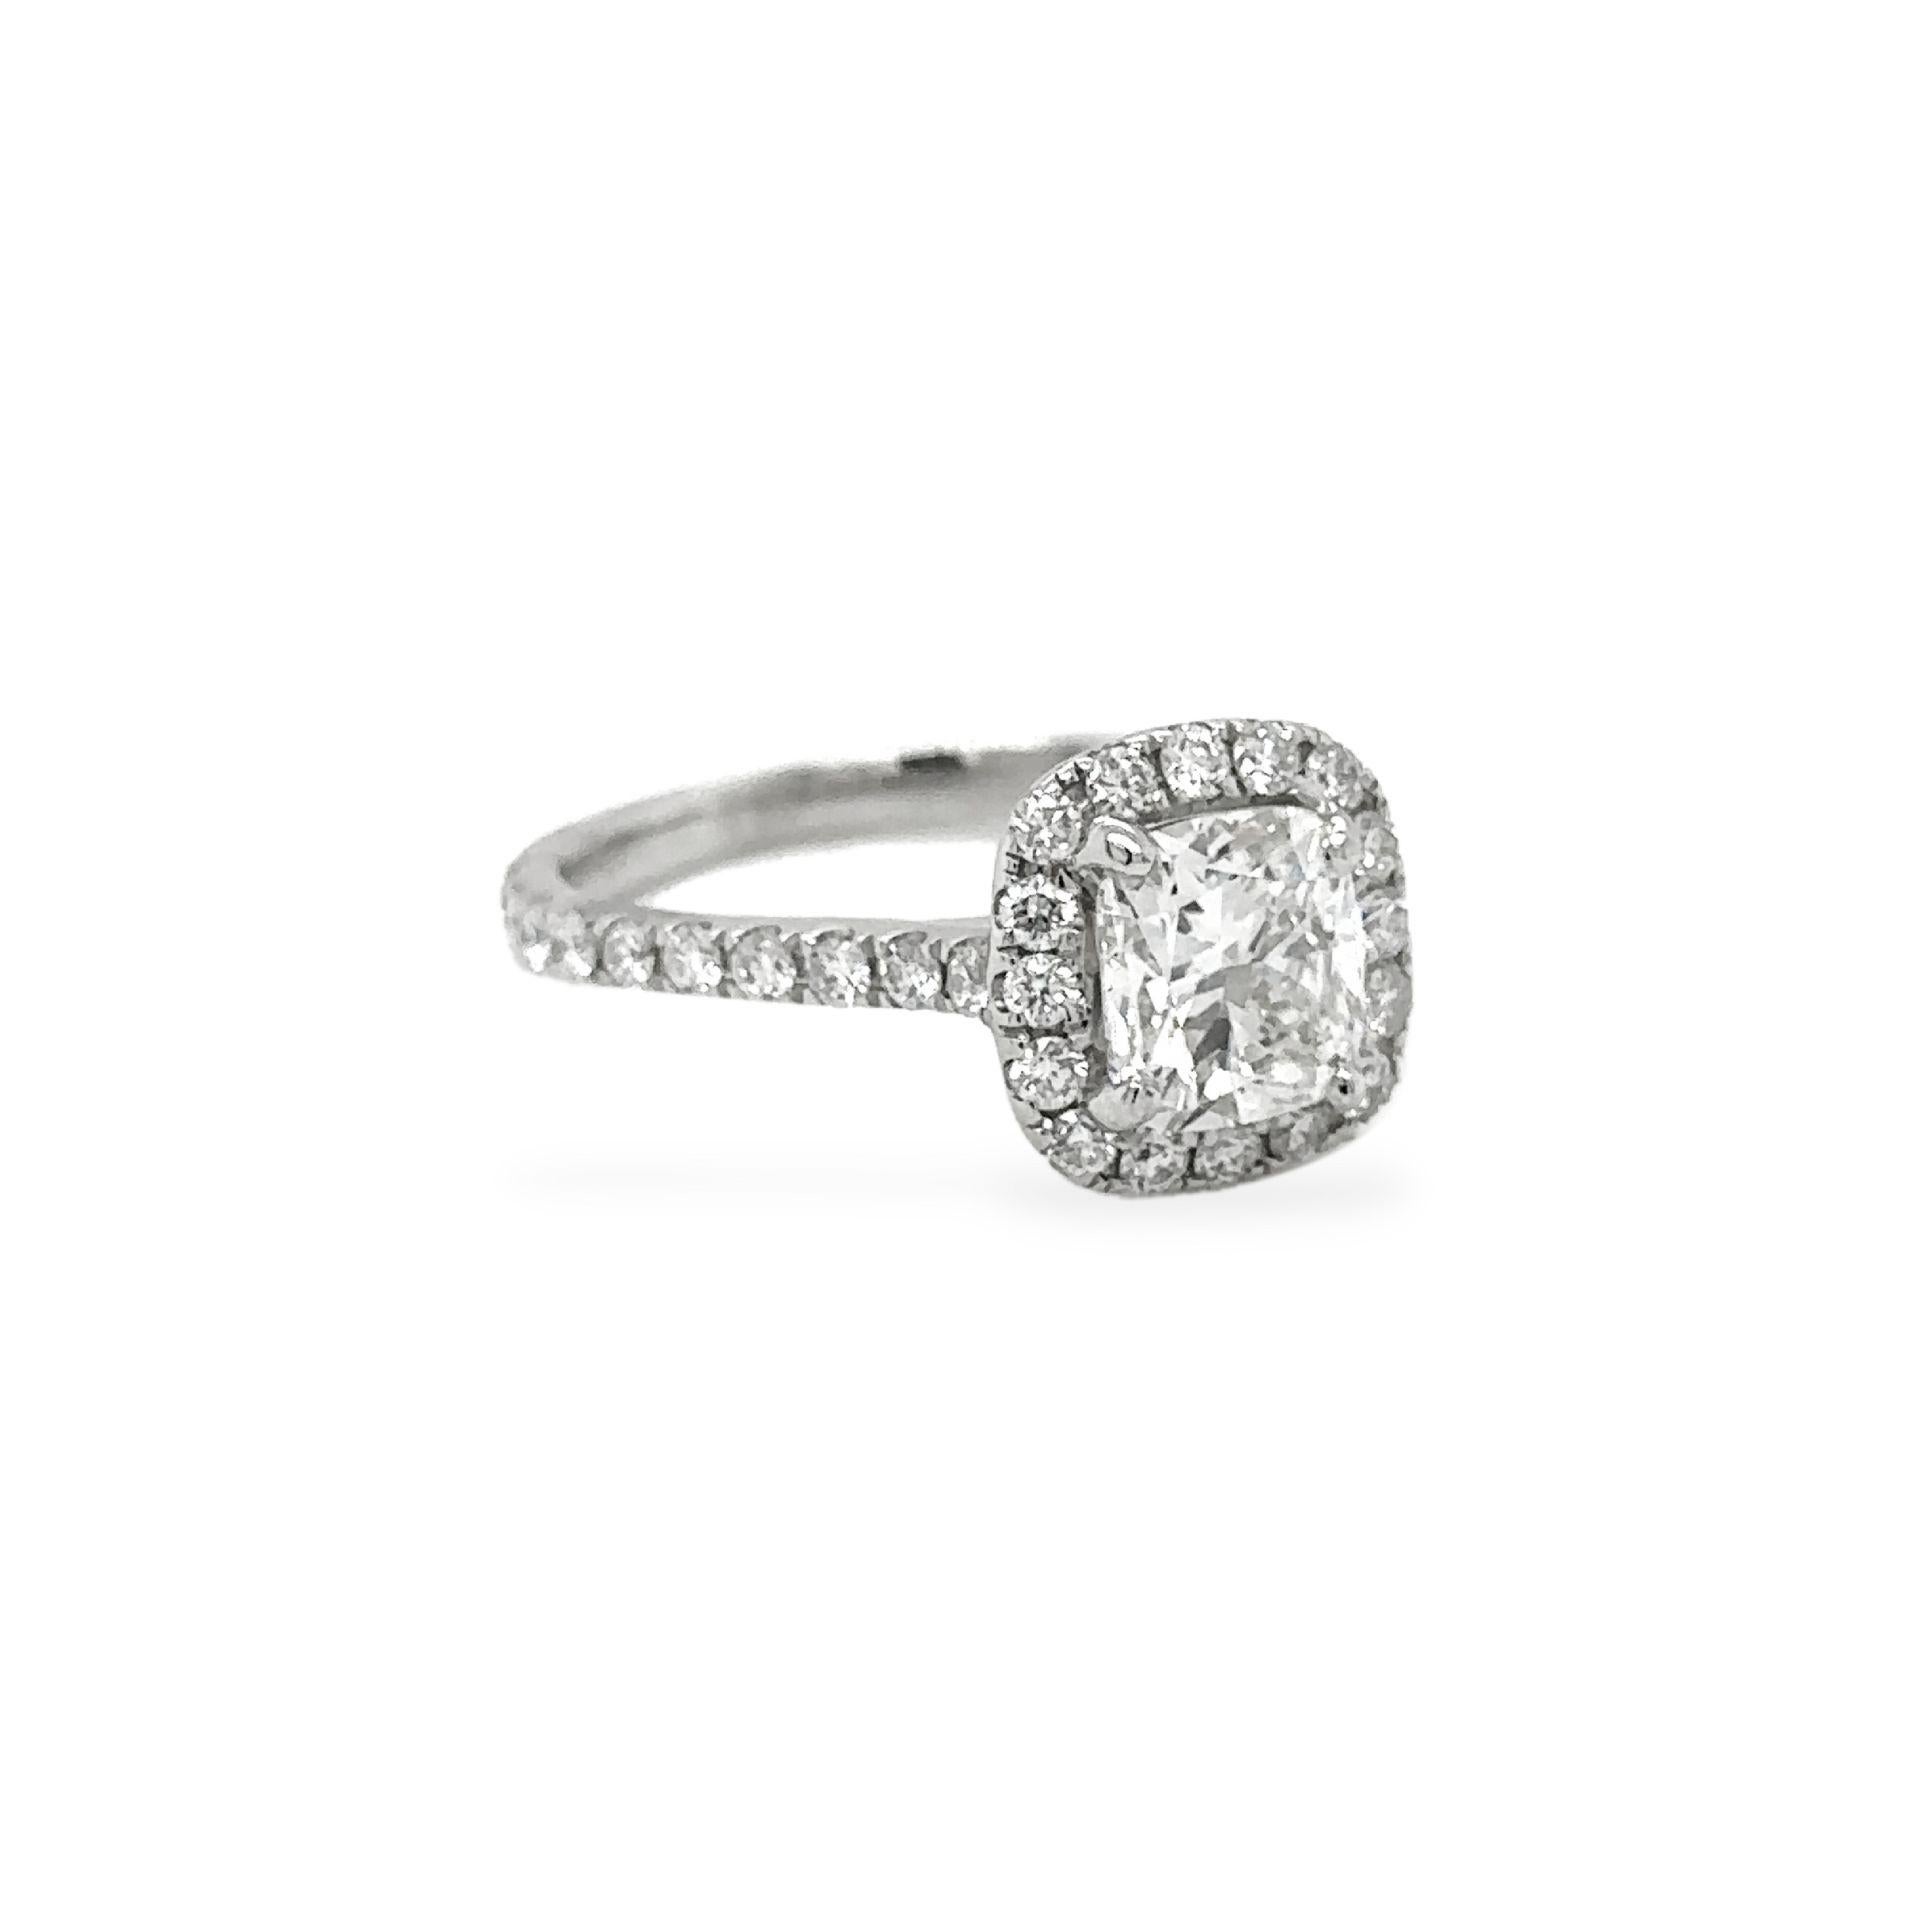 Diamond Cushion Cut 1.17 Carat Engagement Ring Platinum with GIA Certificate In New Condition For Sale In Beverly Hills, CA